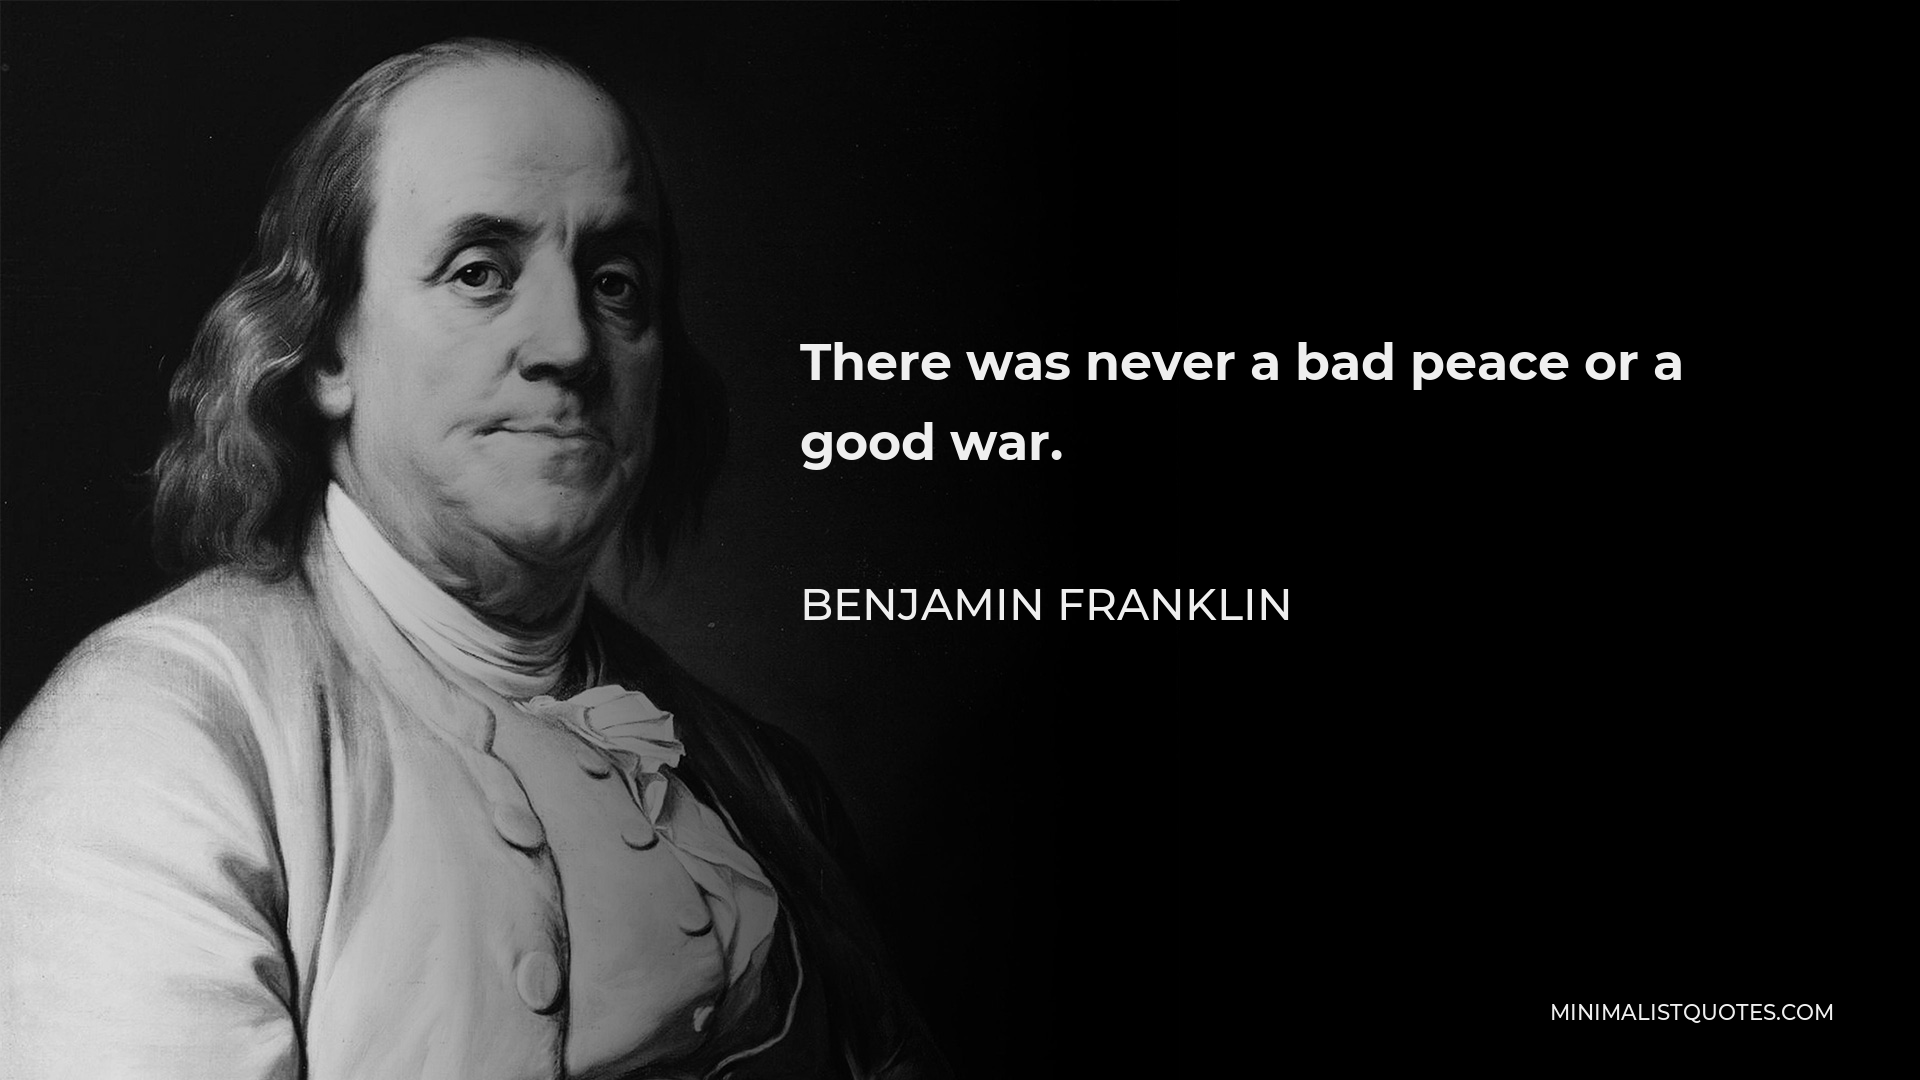 Benjamin Franklin Quote - There was never a bad peace or a good war.